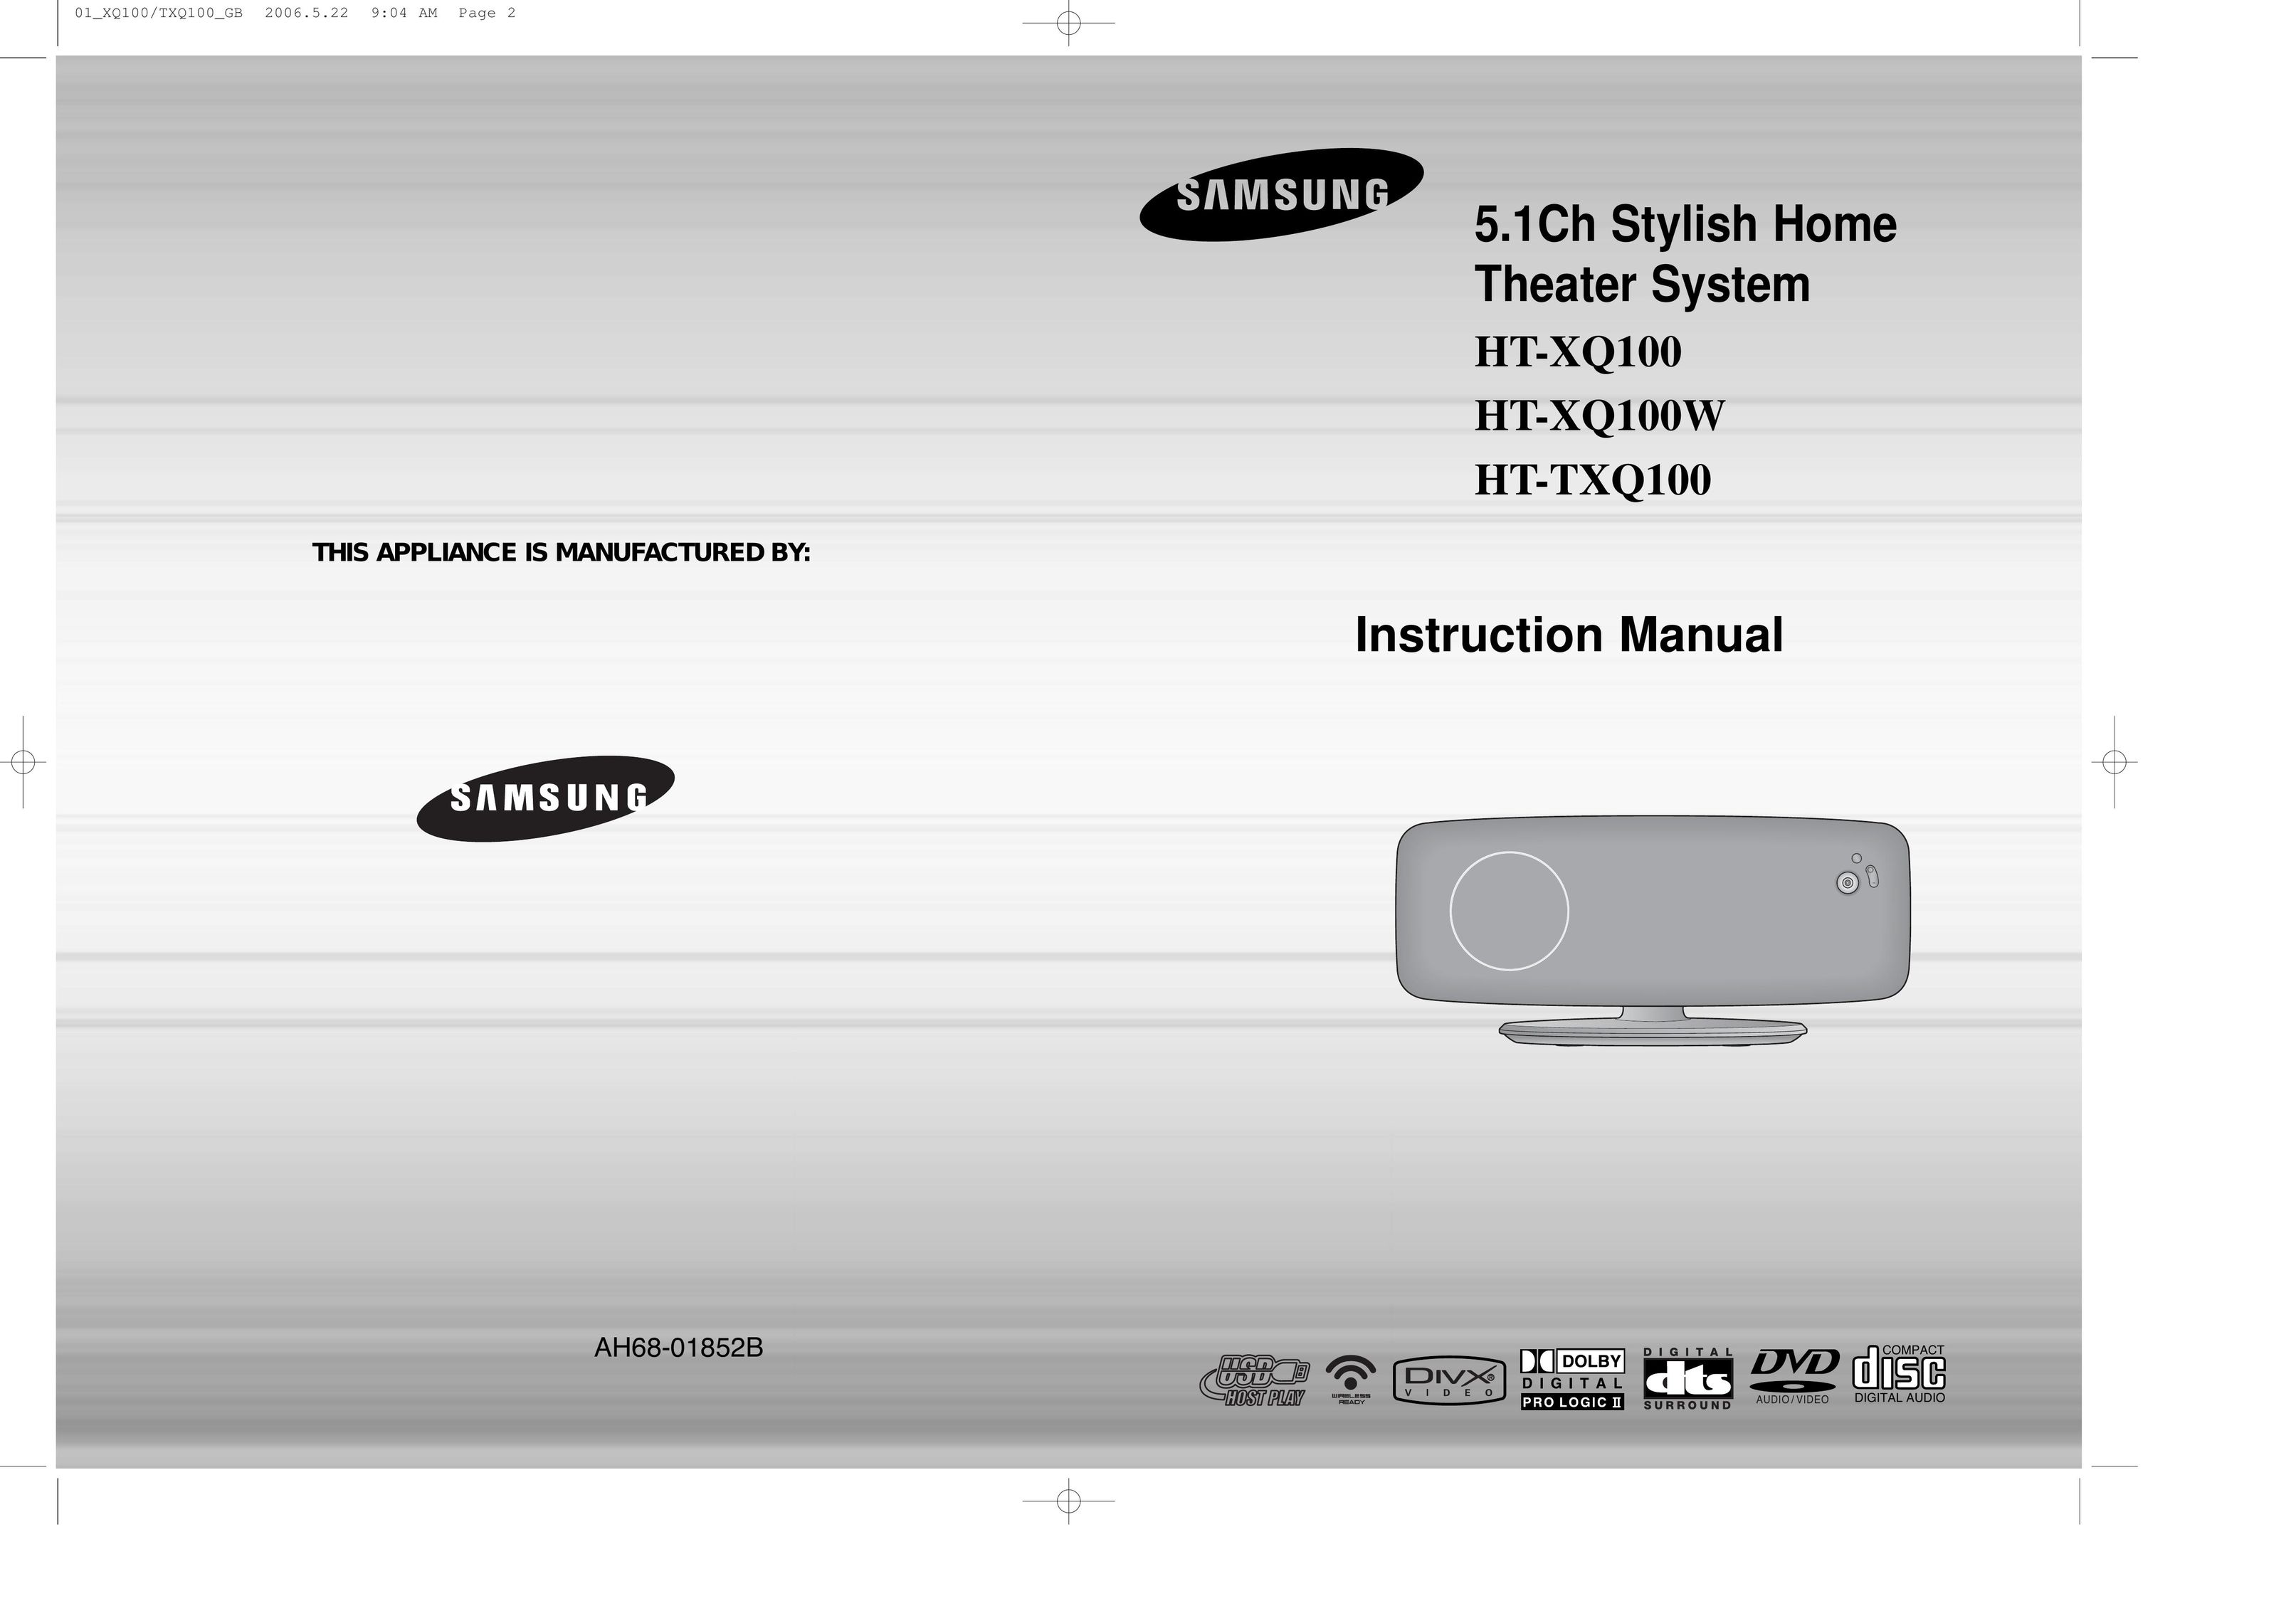 Samsung AH68-01852B Home Theater System User Manual